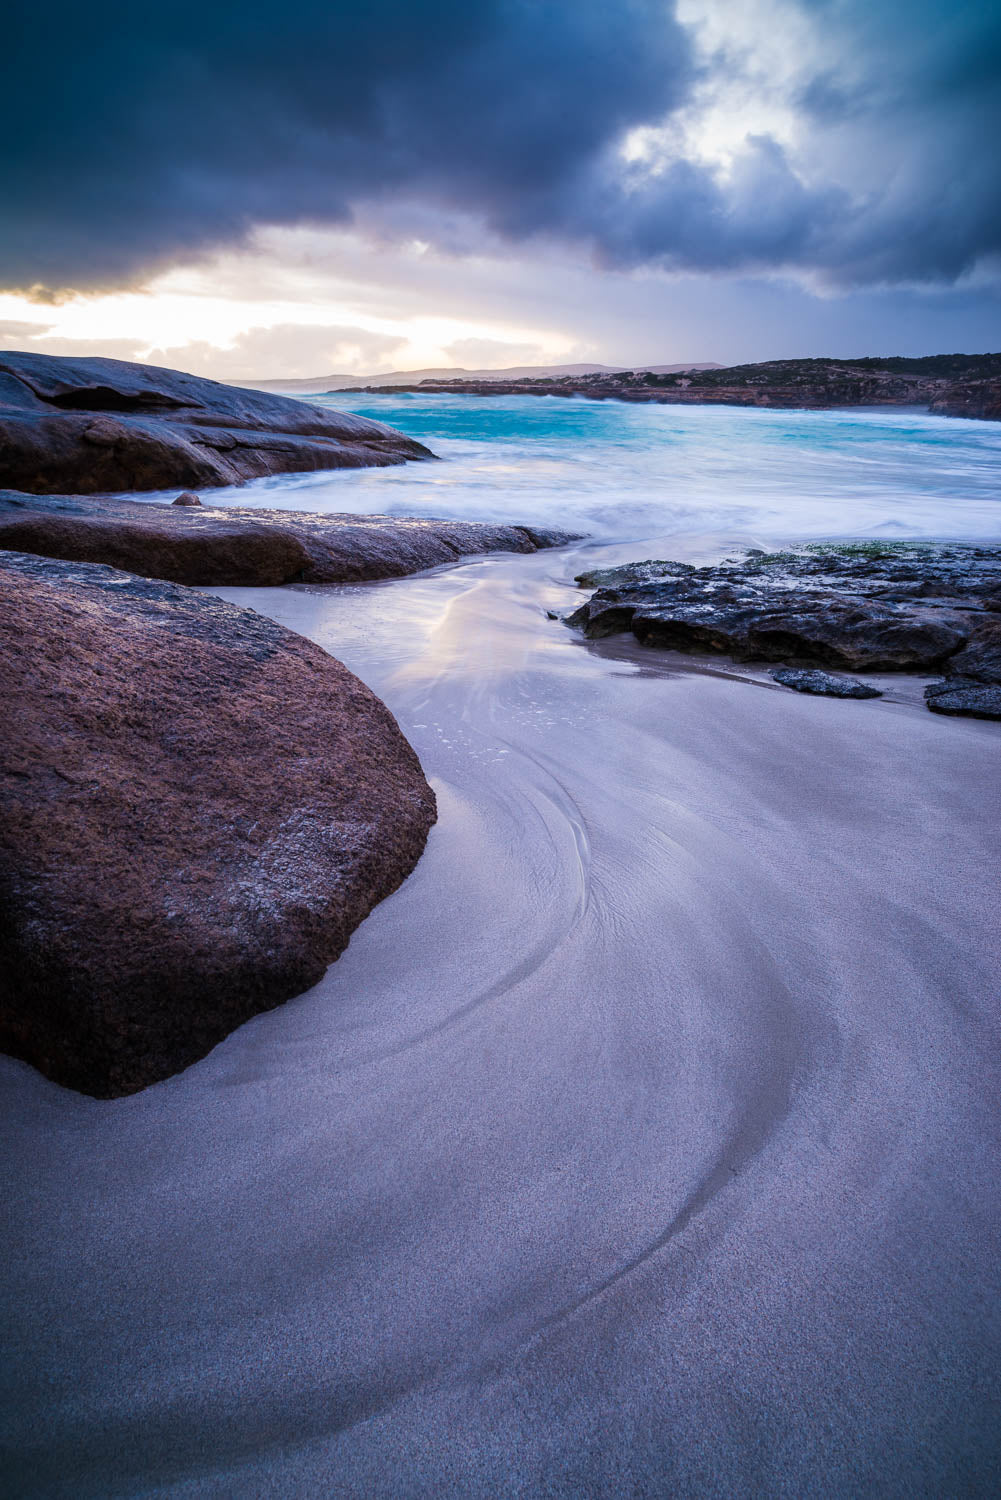 A clean surface of the beach with some big boulders, West Wanna, Eyre Peninsula